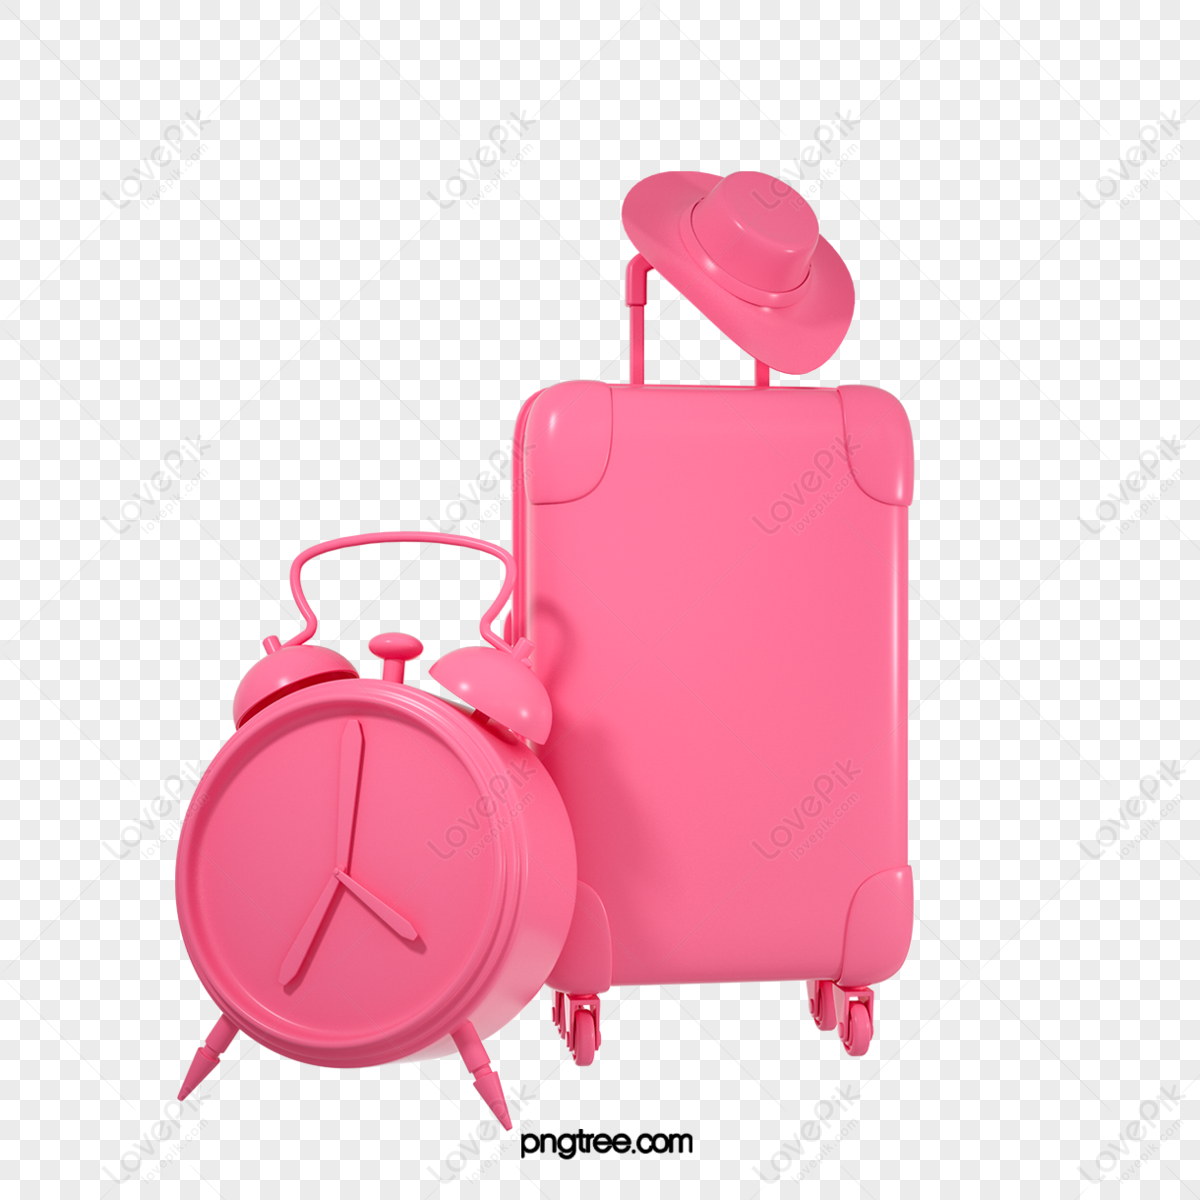 3d stereo suitcase alarm clock travel elements,travel around the world,sun hat png hd transparent image